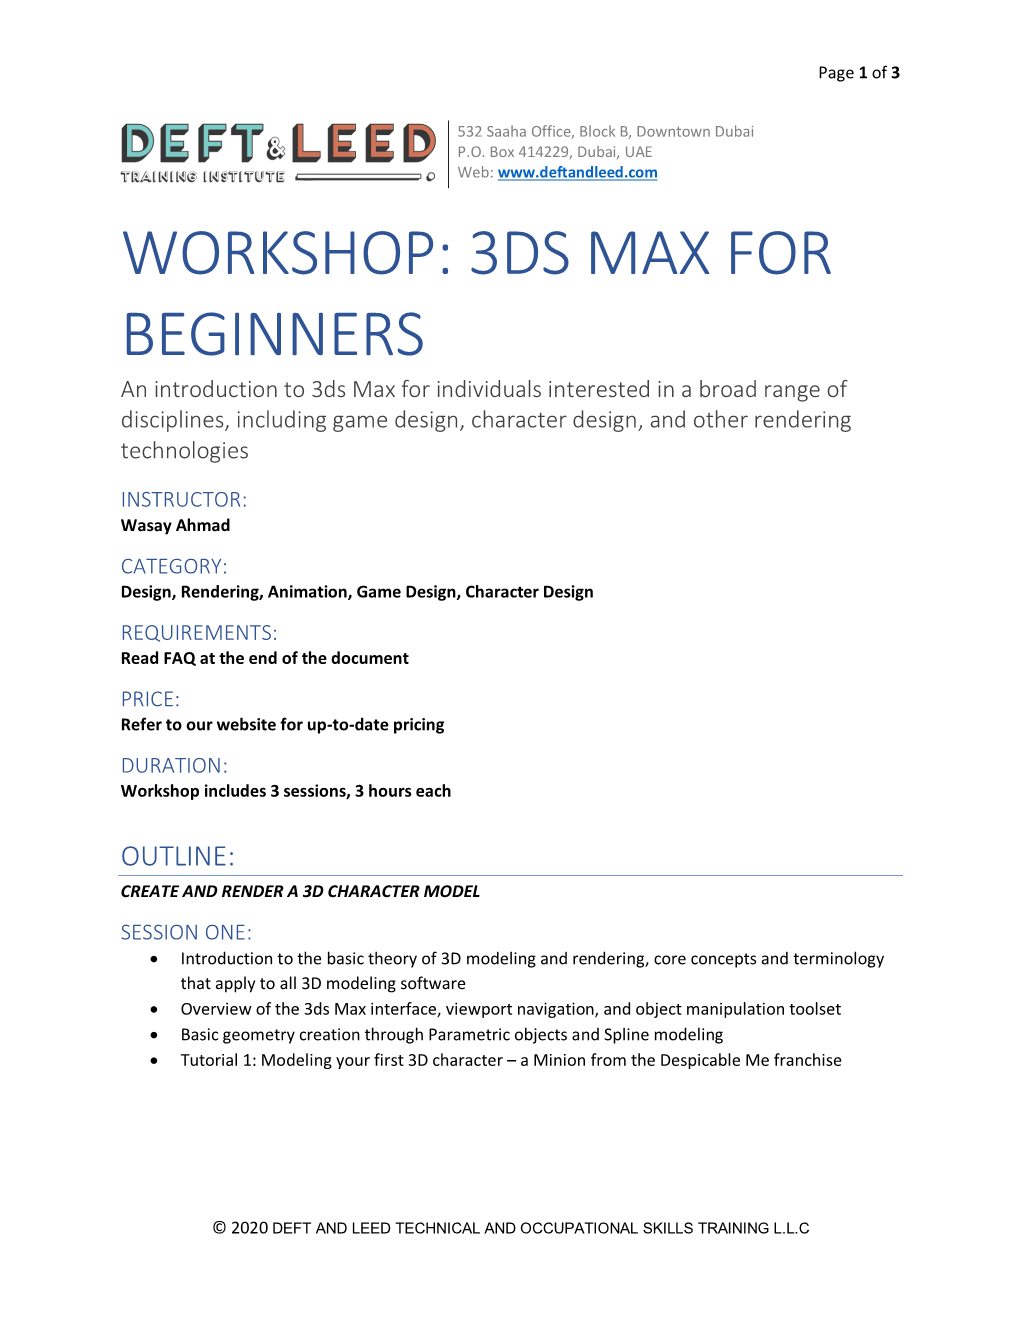 Workshop: 3Ds Max for Beginners